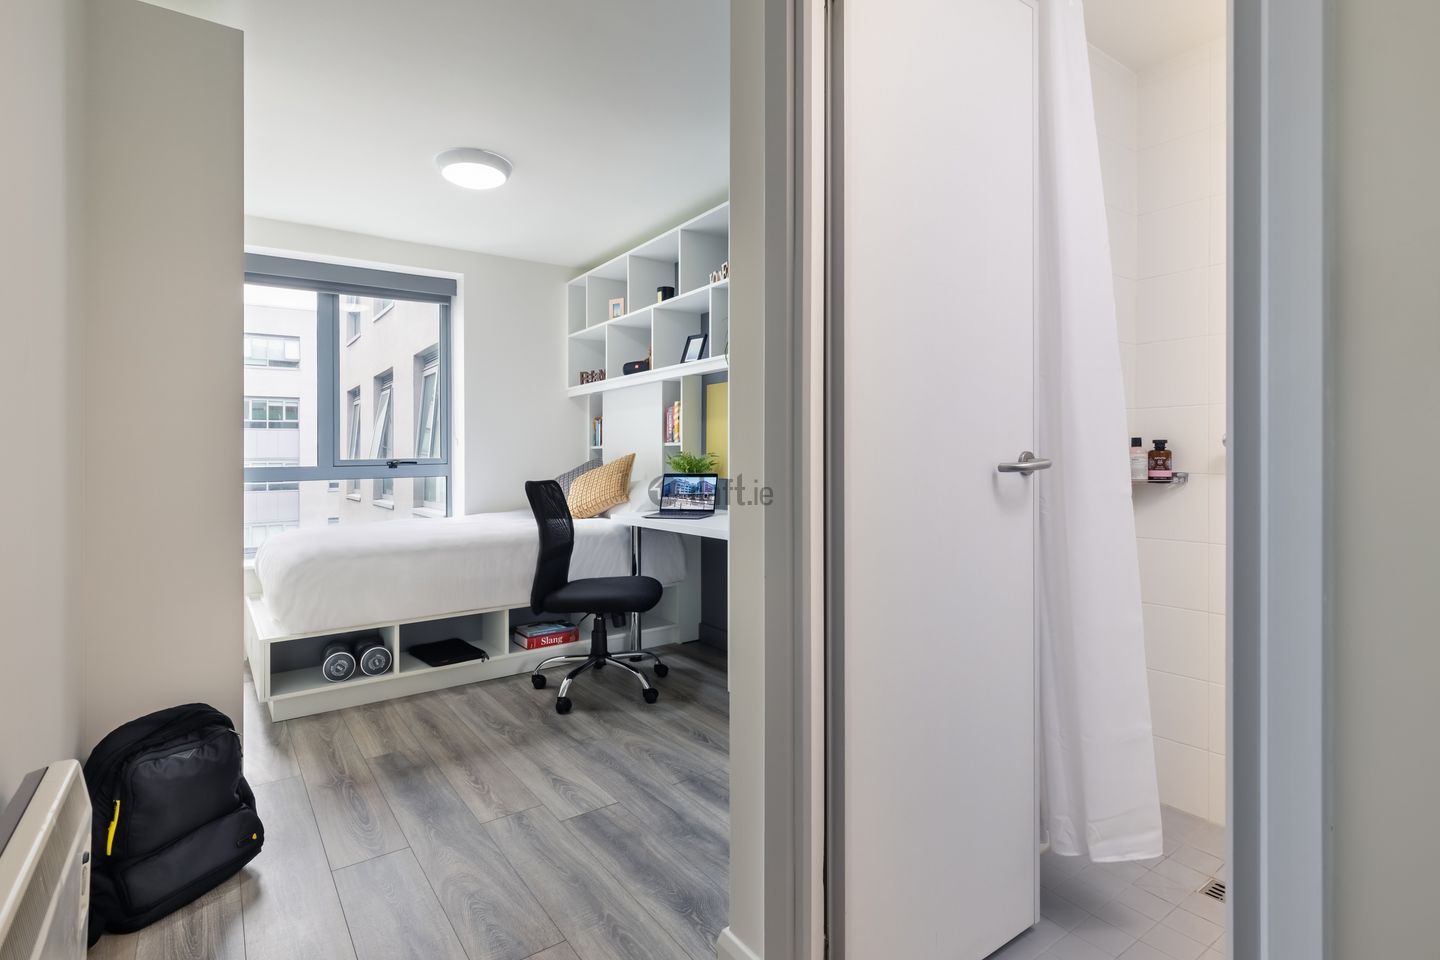 Deluxe Room, Hubble Living Student Accommodation on NCI Campus, Mayor Street, IFSC, Dublin 1